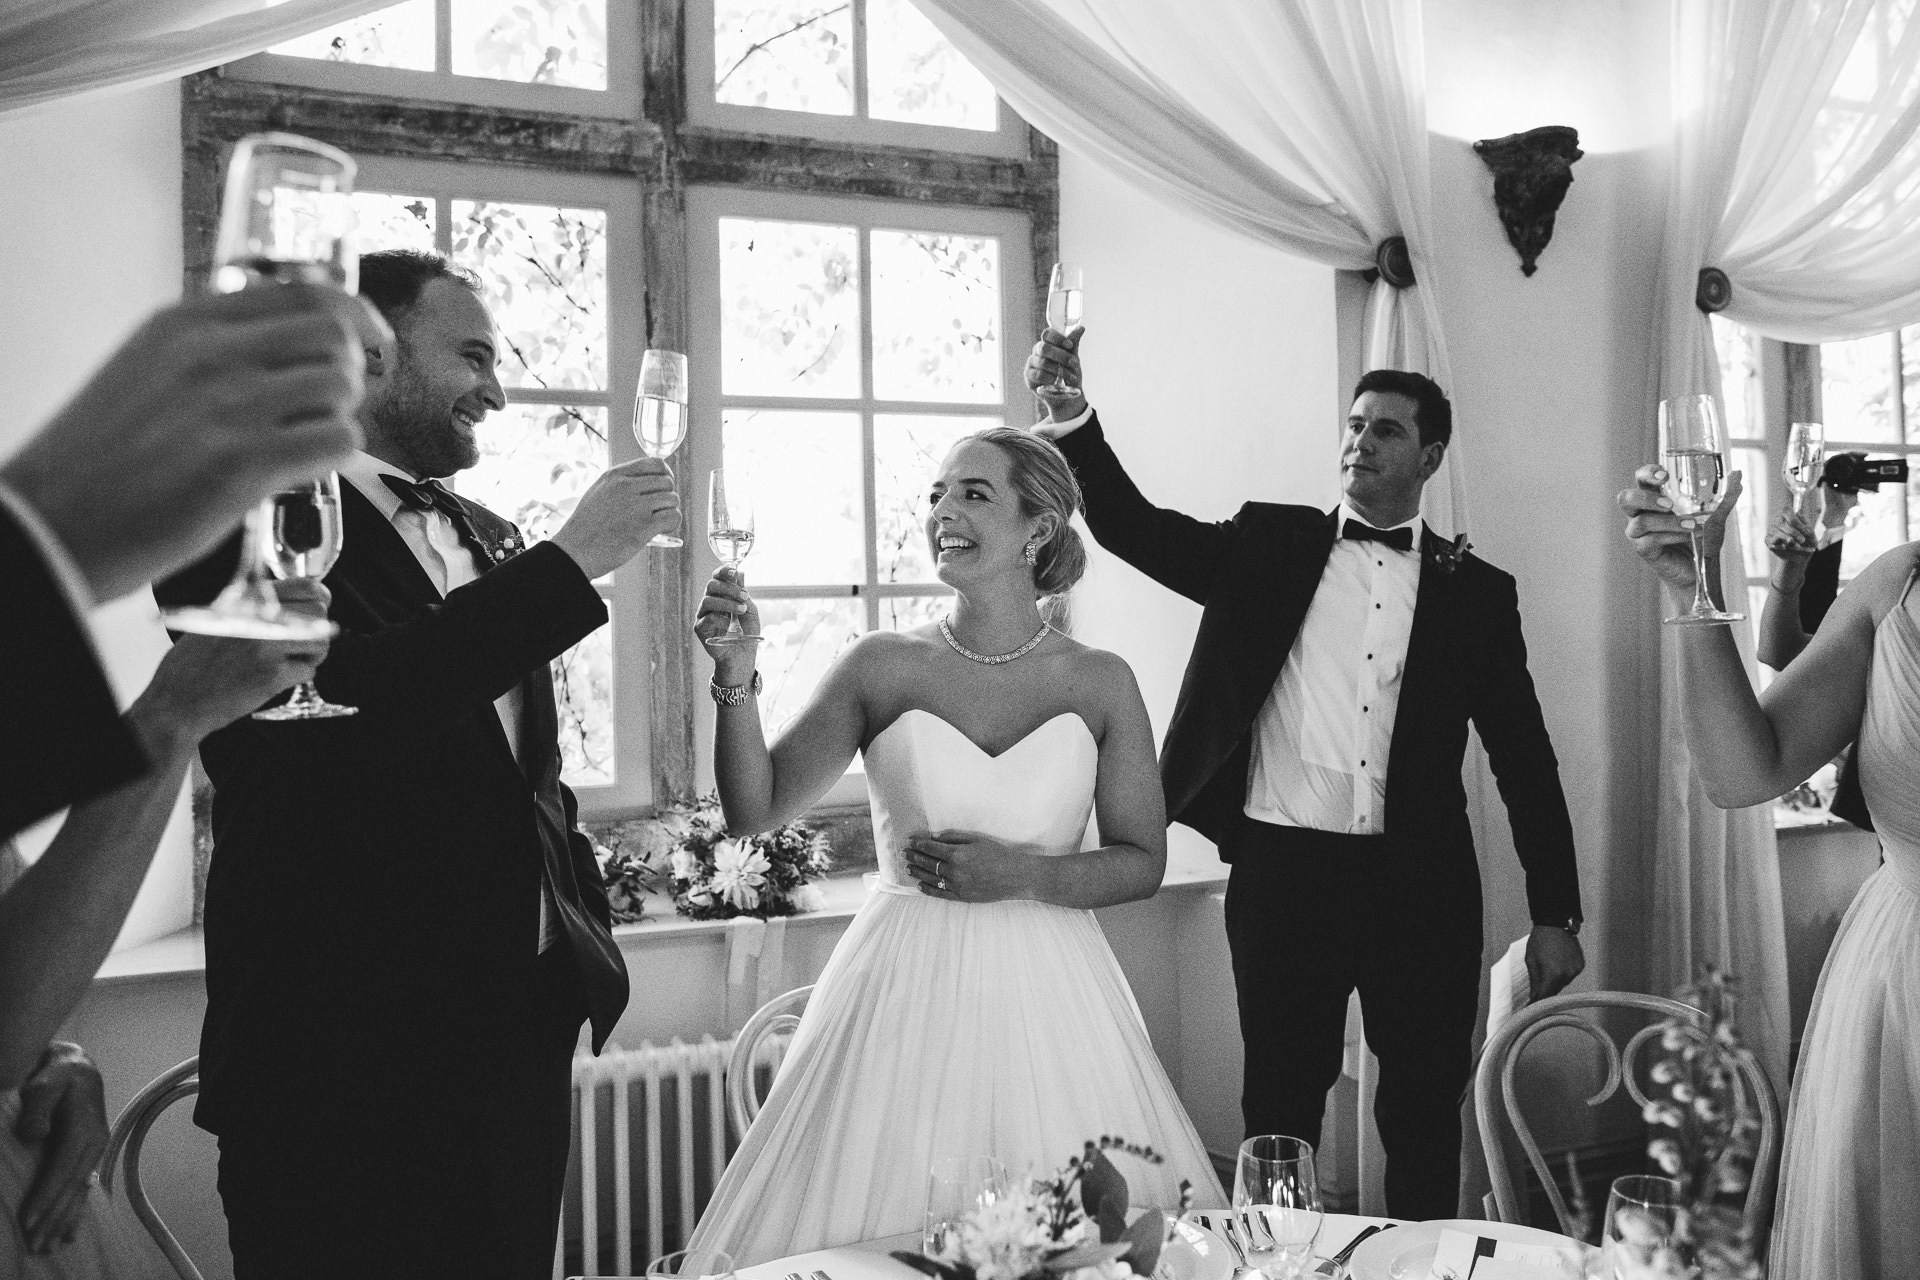 Bride and groom raising glasses and smiling at each other